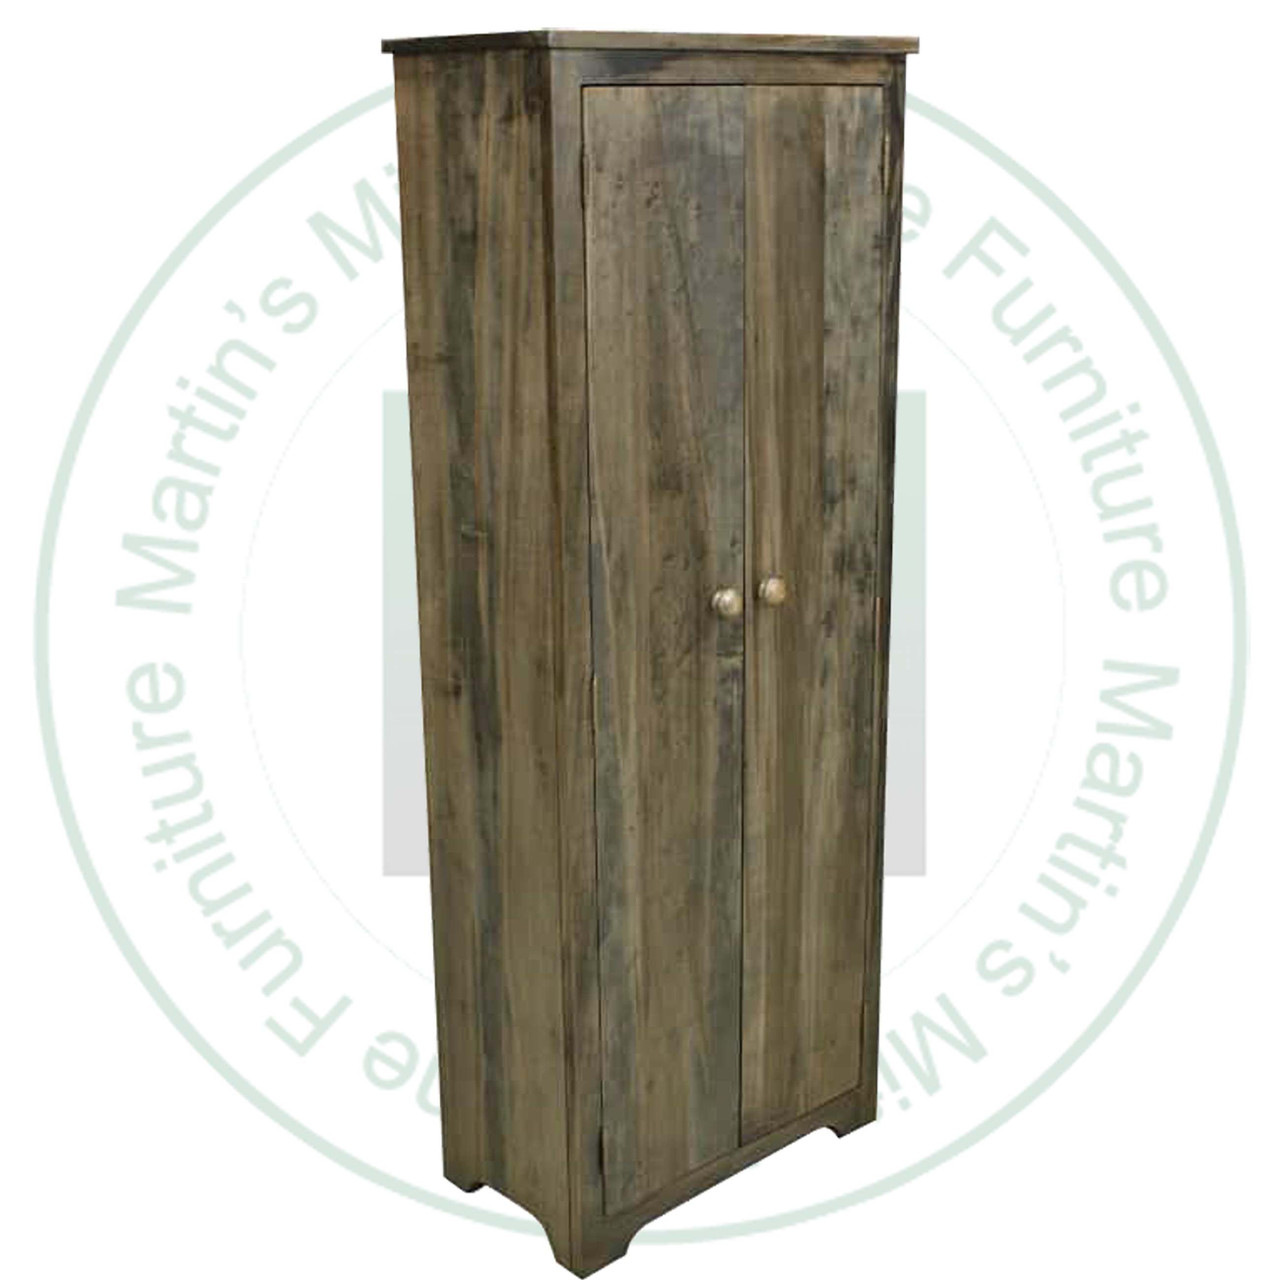 Maple Nith River Jam Cupboard 12''D x 22''W x 72''H With 2 Doors